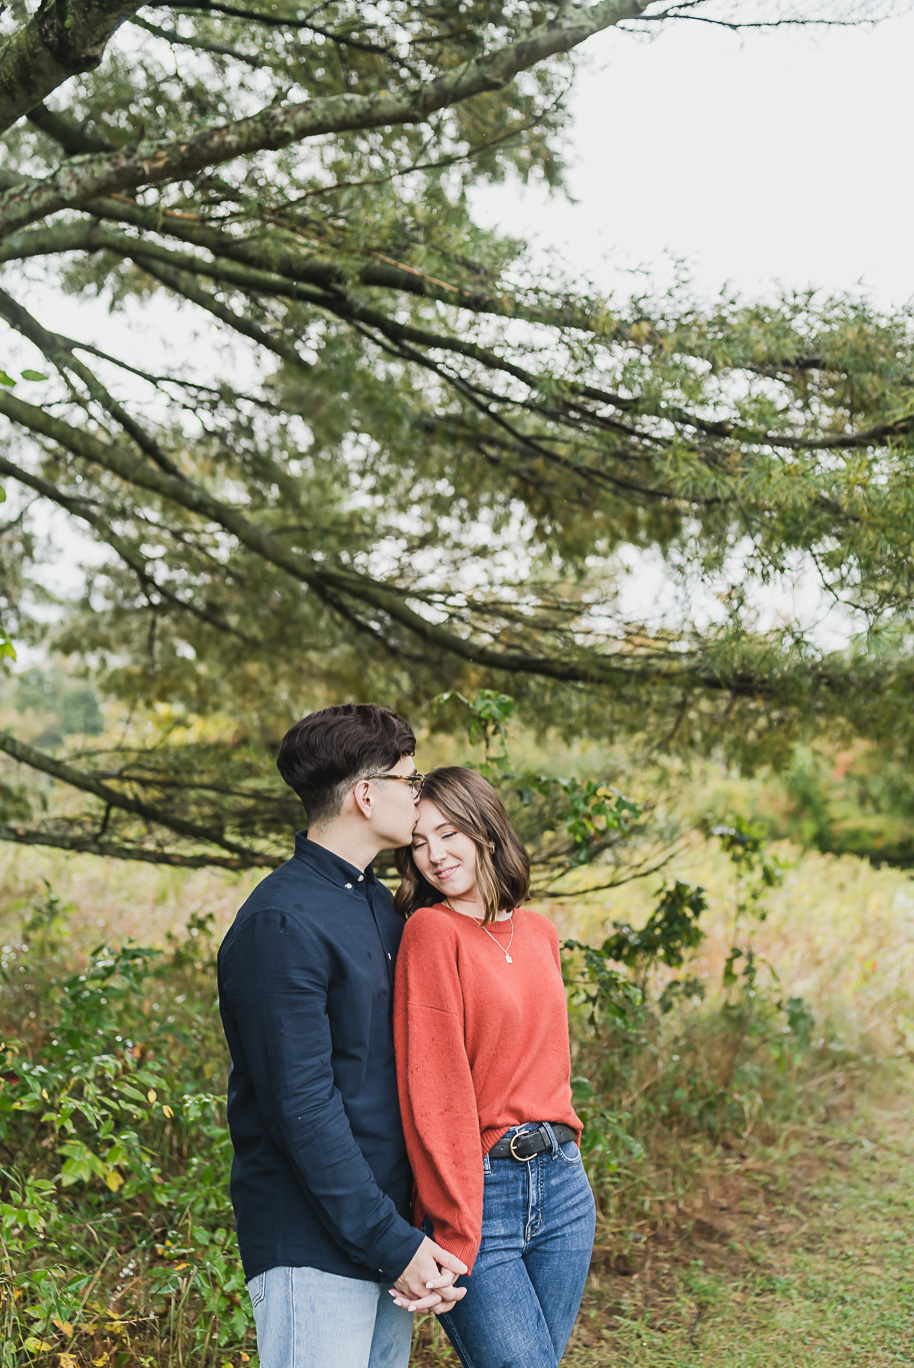 Fall Stony Creek engagement photos in Washington, Michigan provided by Kari Dawson, top-rated Metro Detroit wedding photographer, and her team.